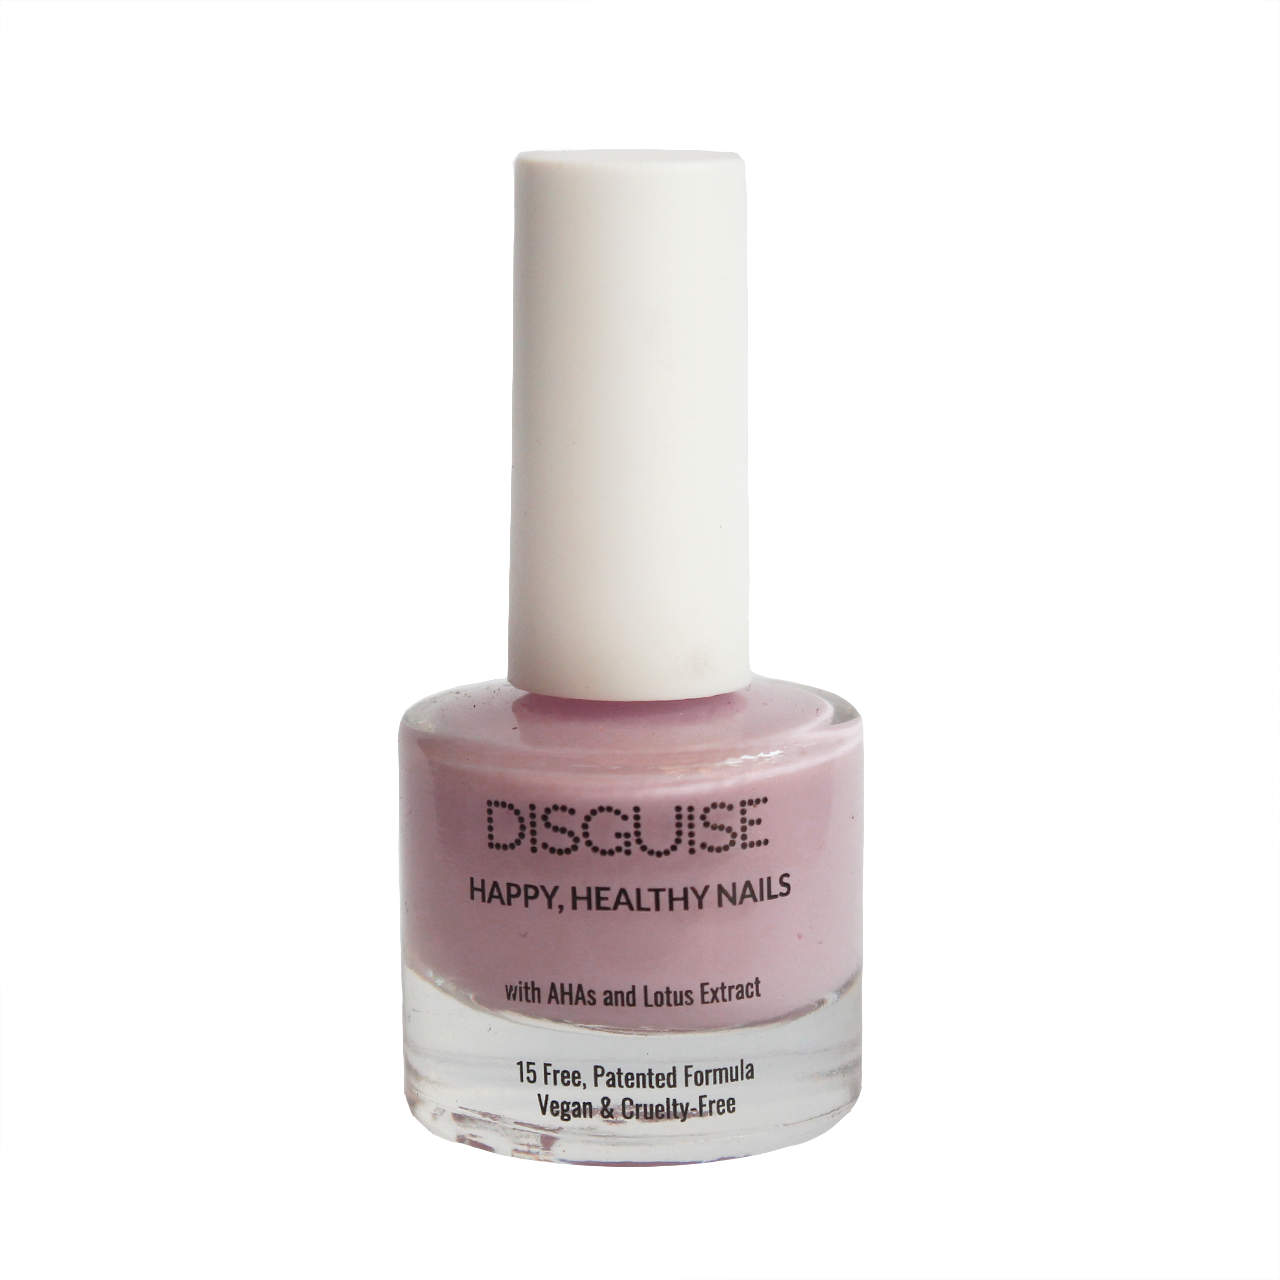 Disguise Cosmetics Happy, Healthy Nails Lavender Field 120 9ml